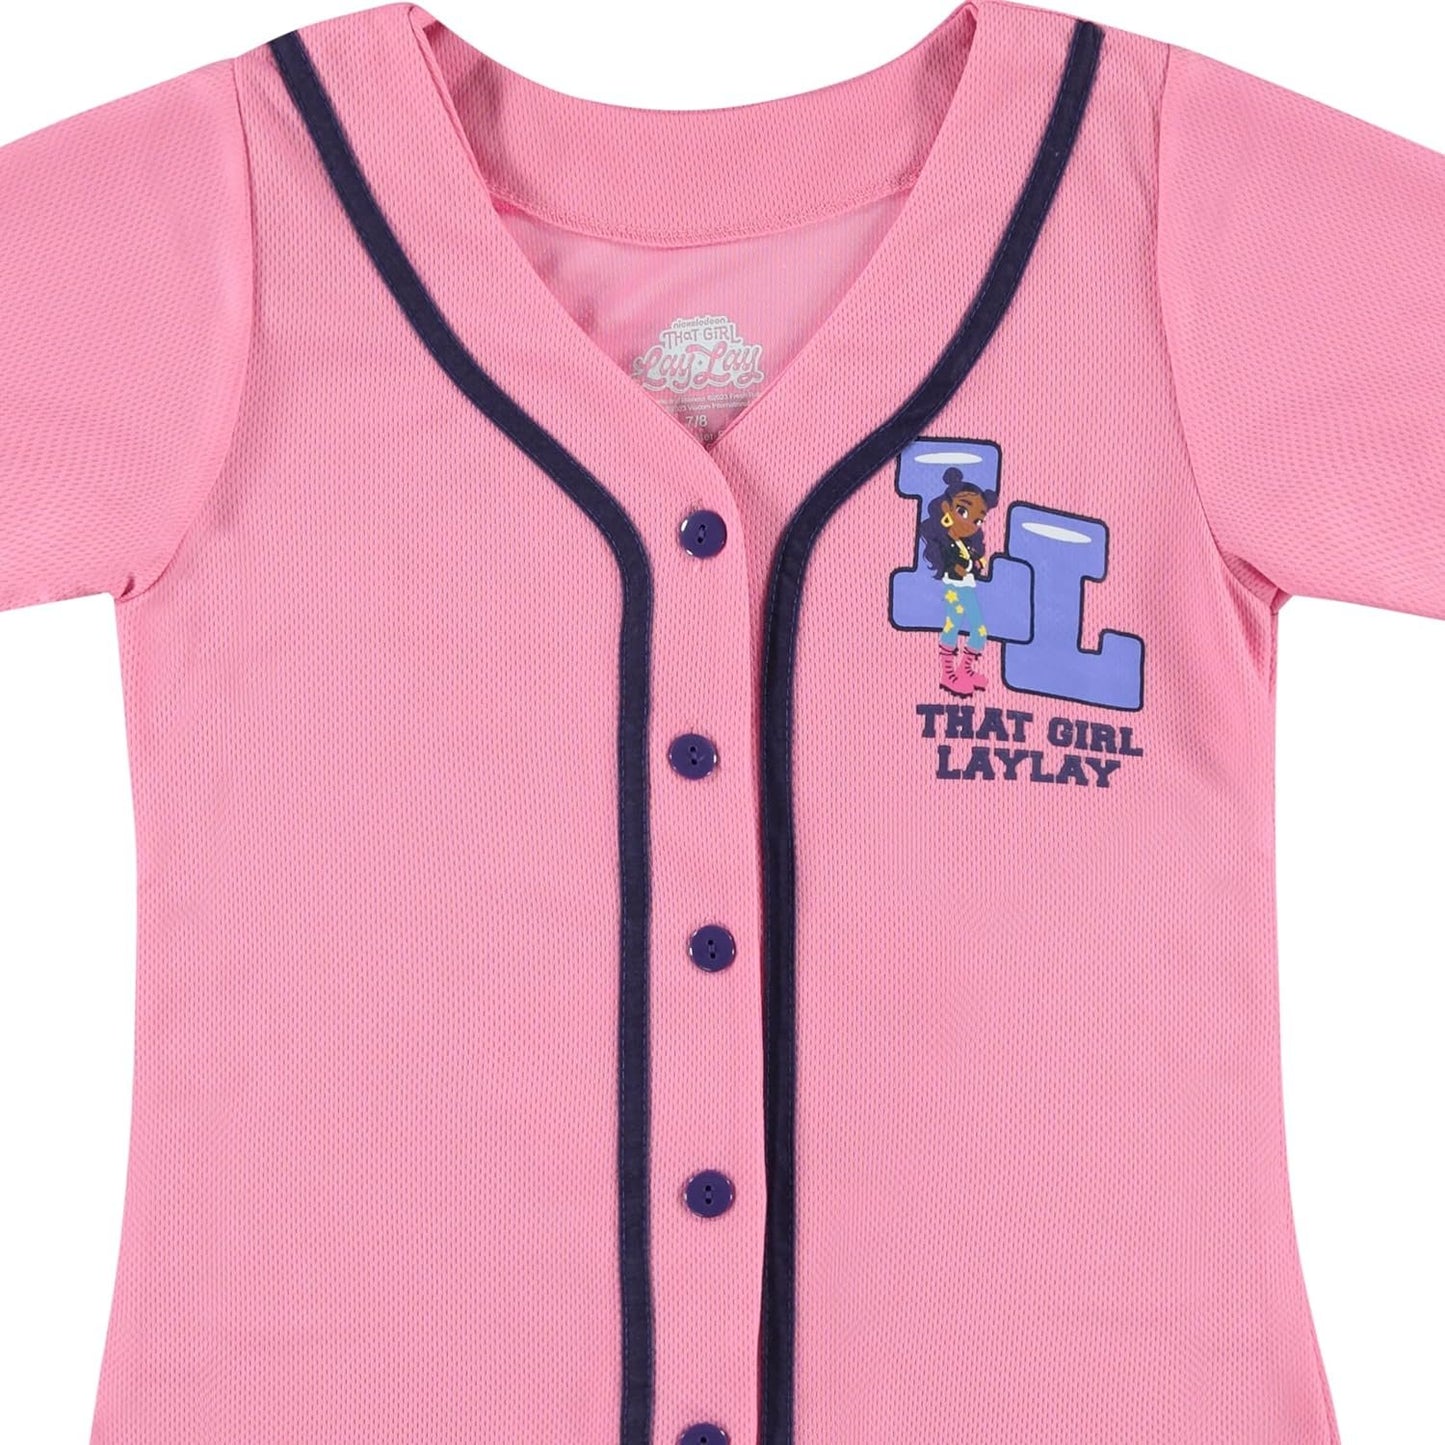 That Girl Lay Lay Baseball Jersey T-Shirt- Little and Big Girl Sizes 4-16